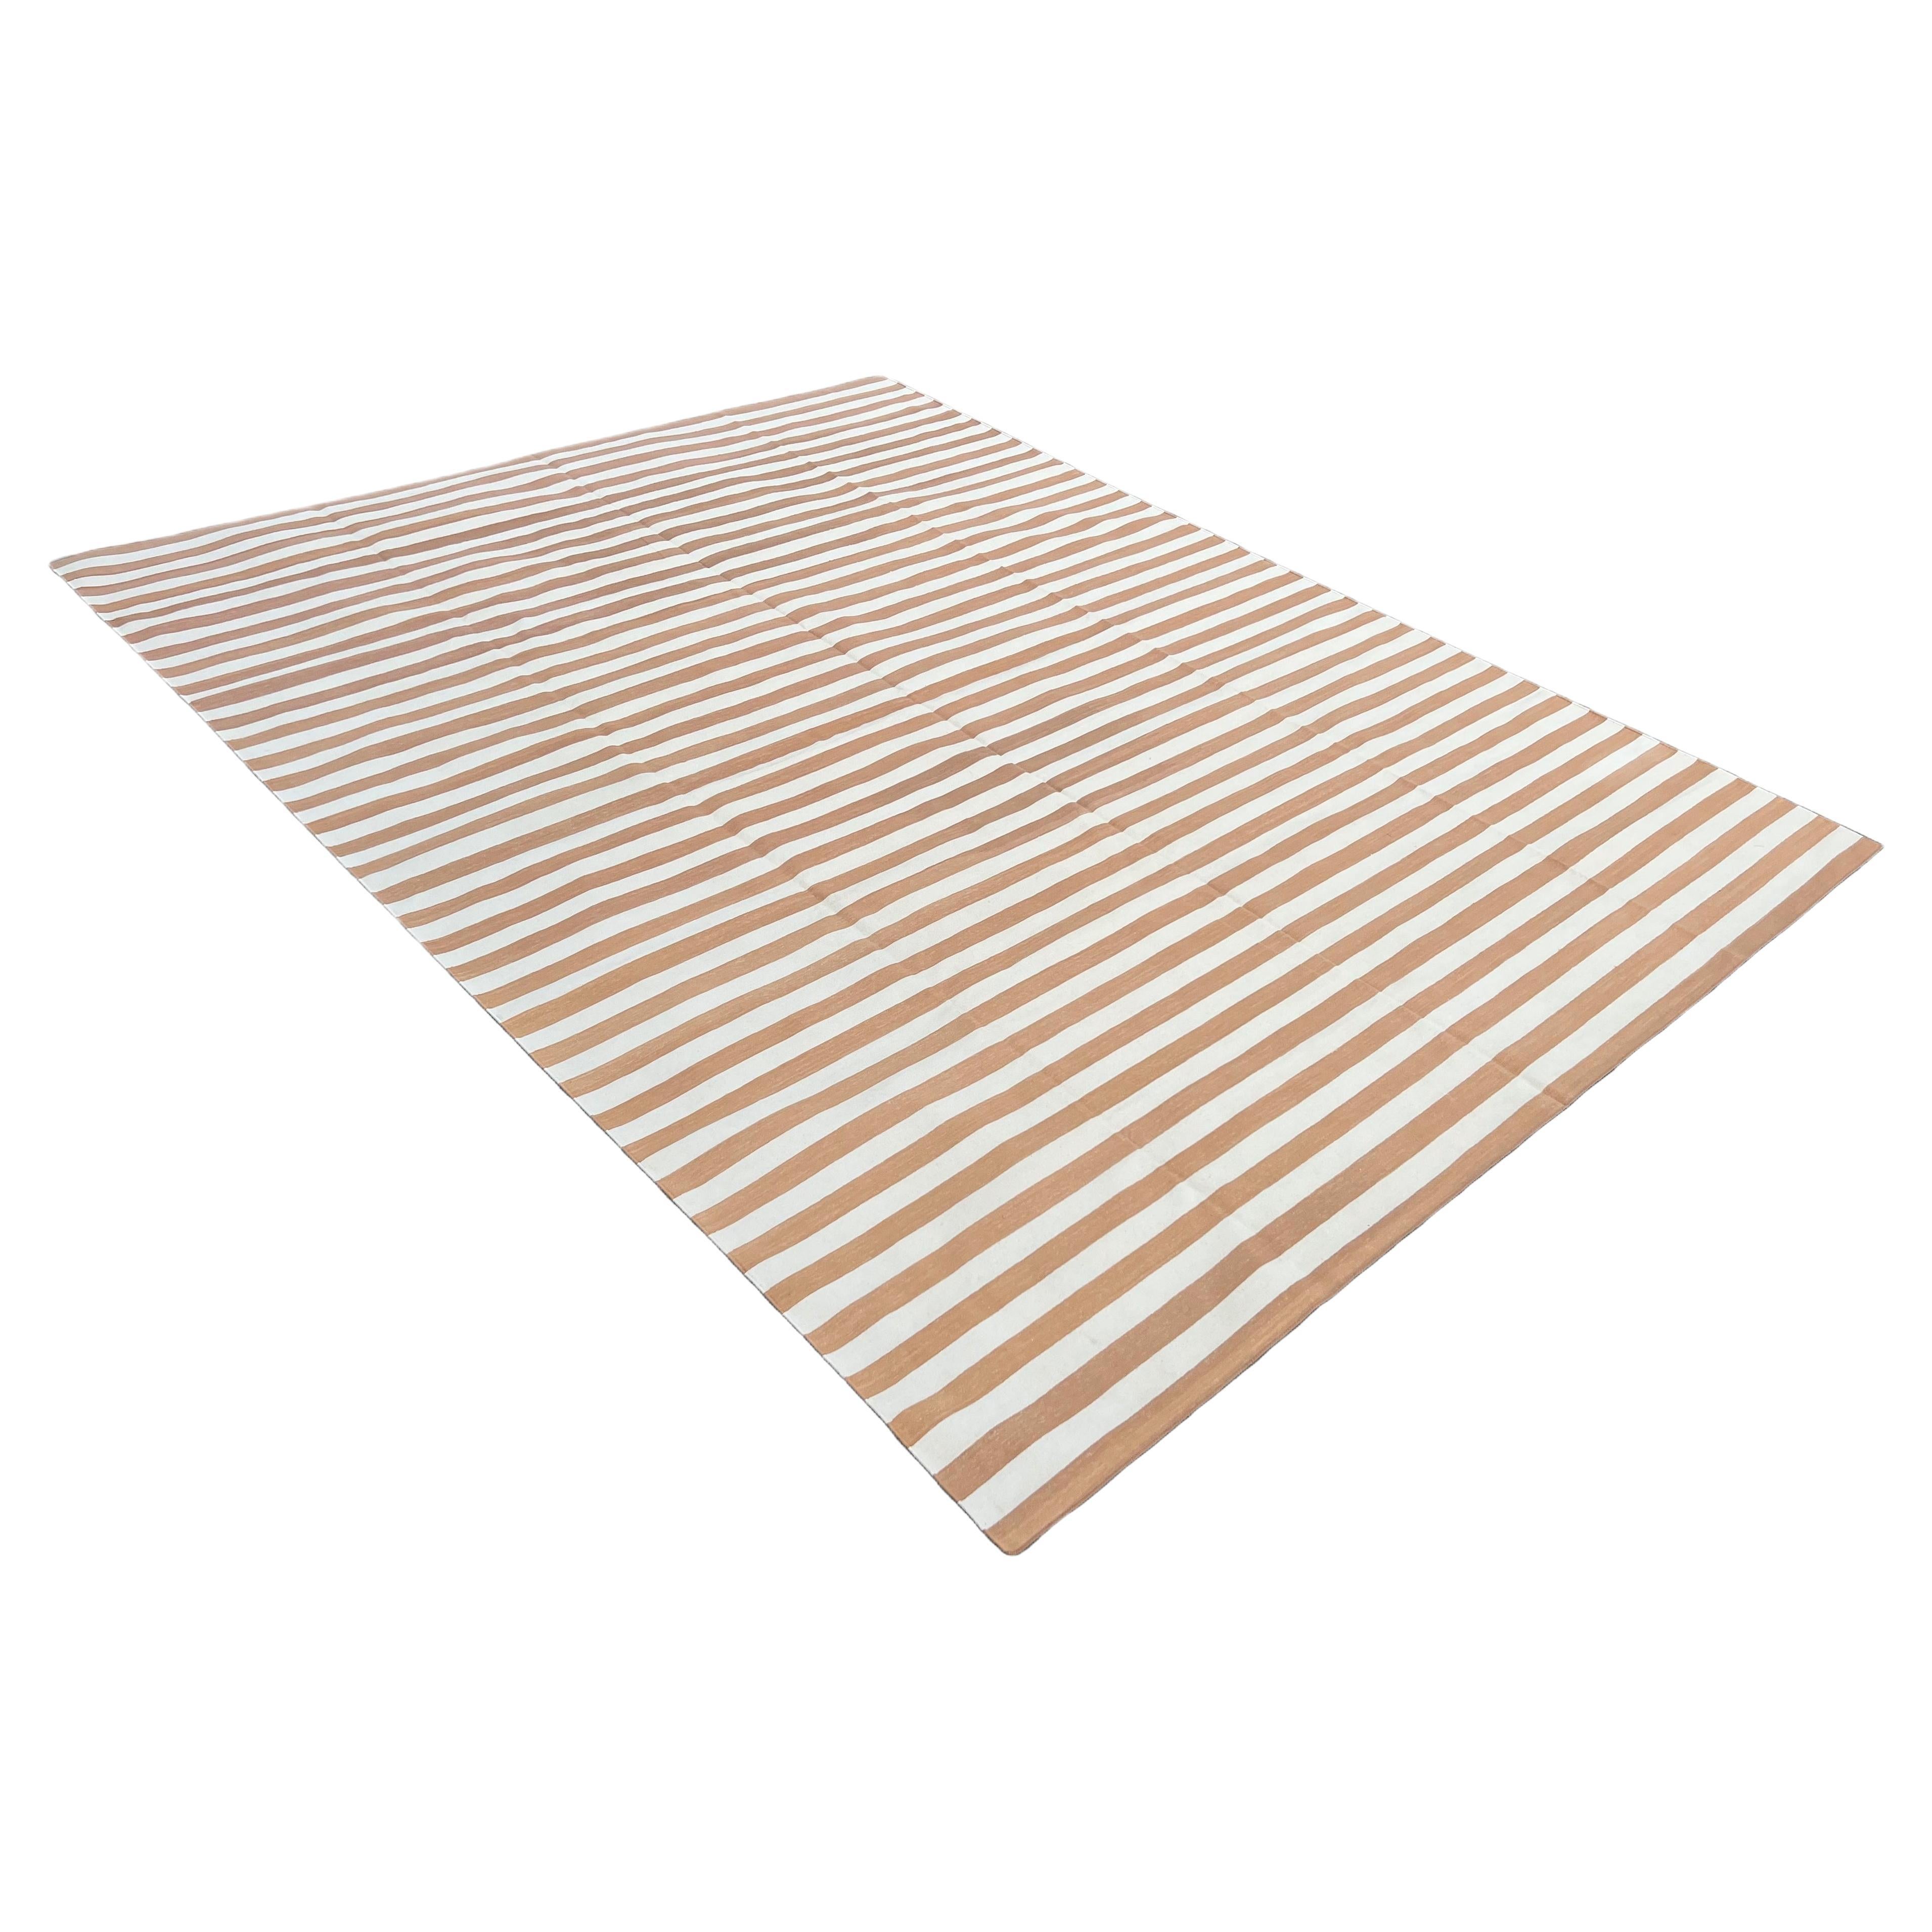 Handmade Cotton Area Flat Weave Rug, 9x12 Tan And White Striped Indian Dhurrie For Sale